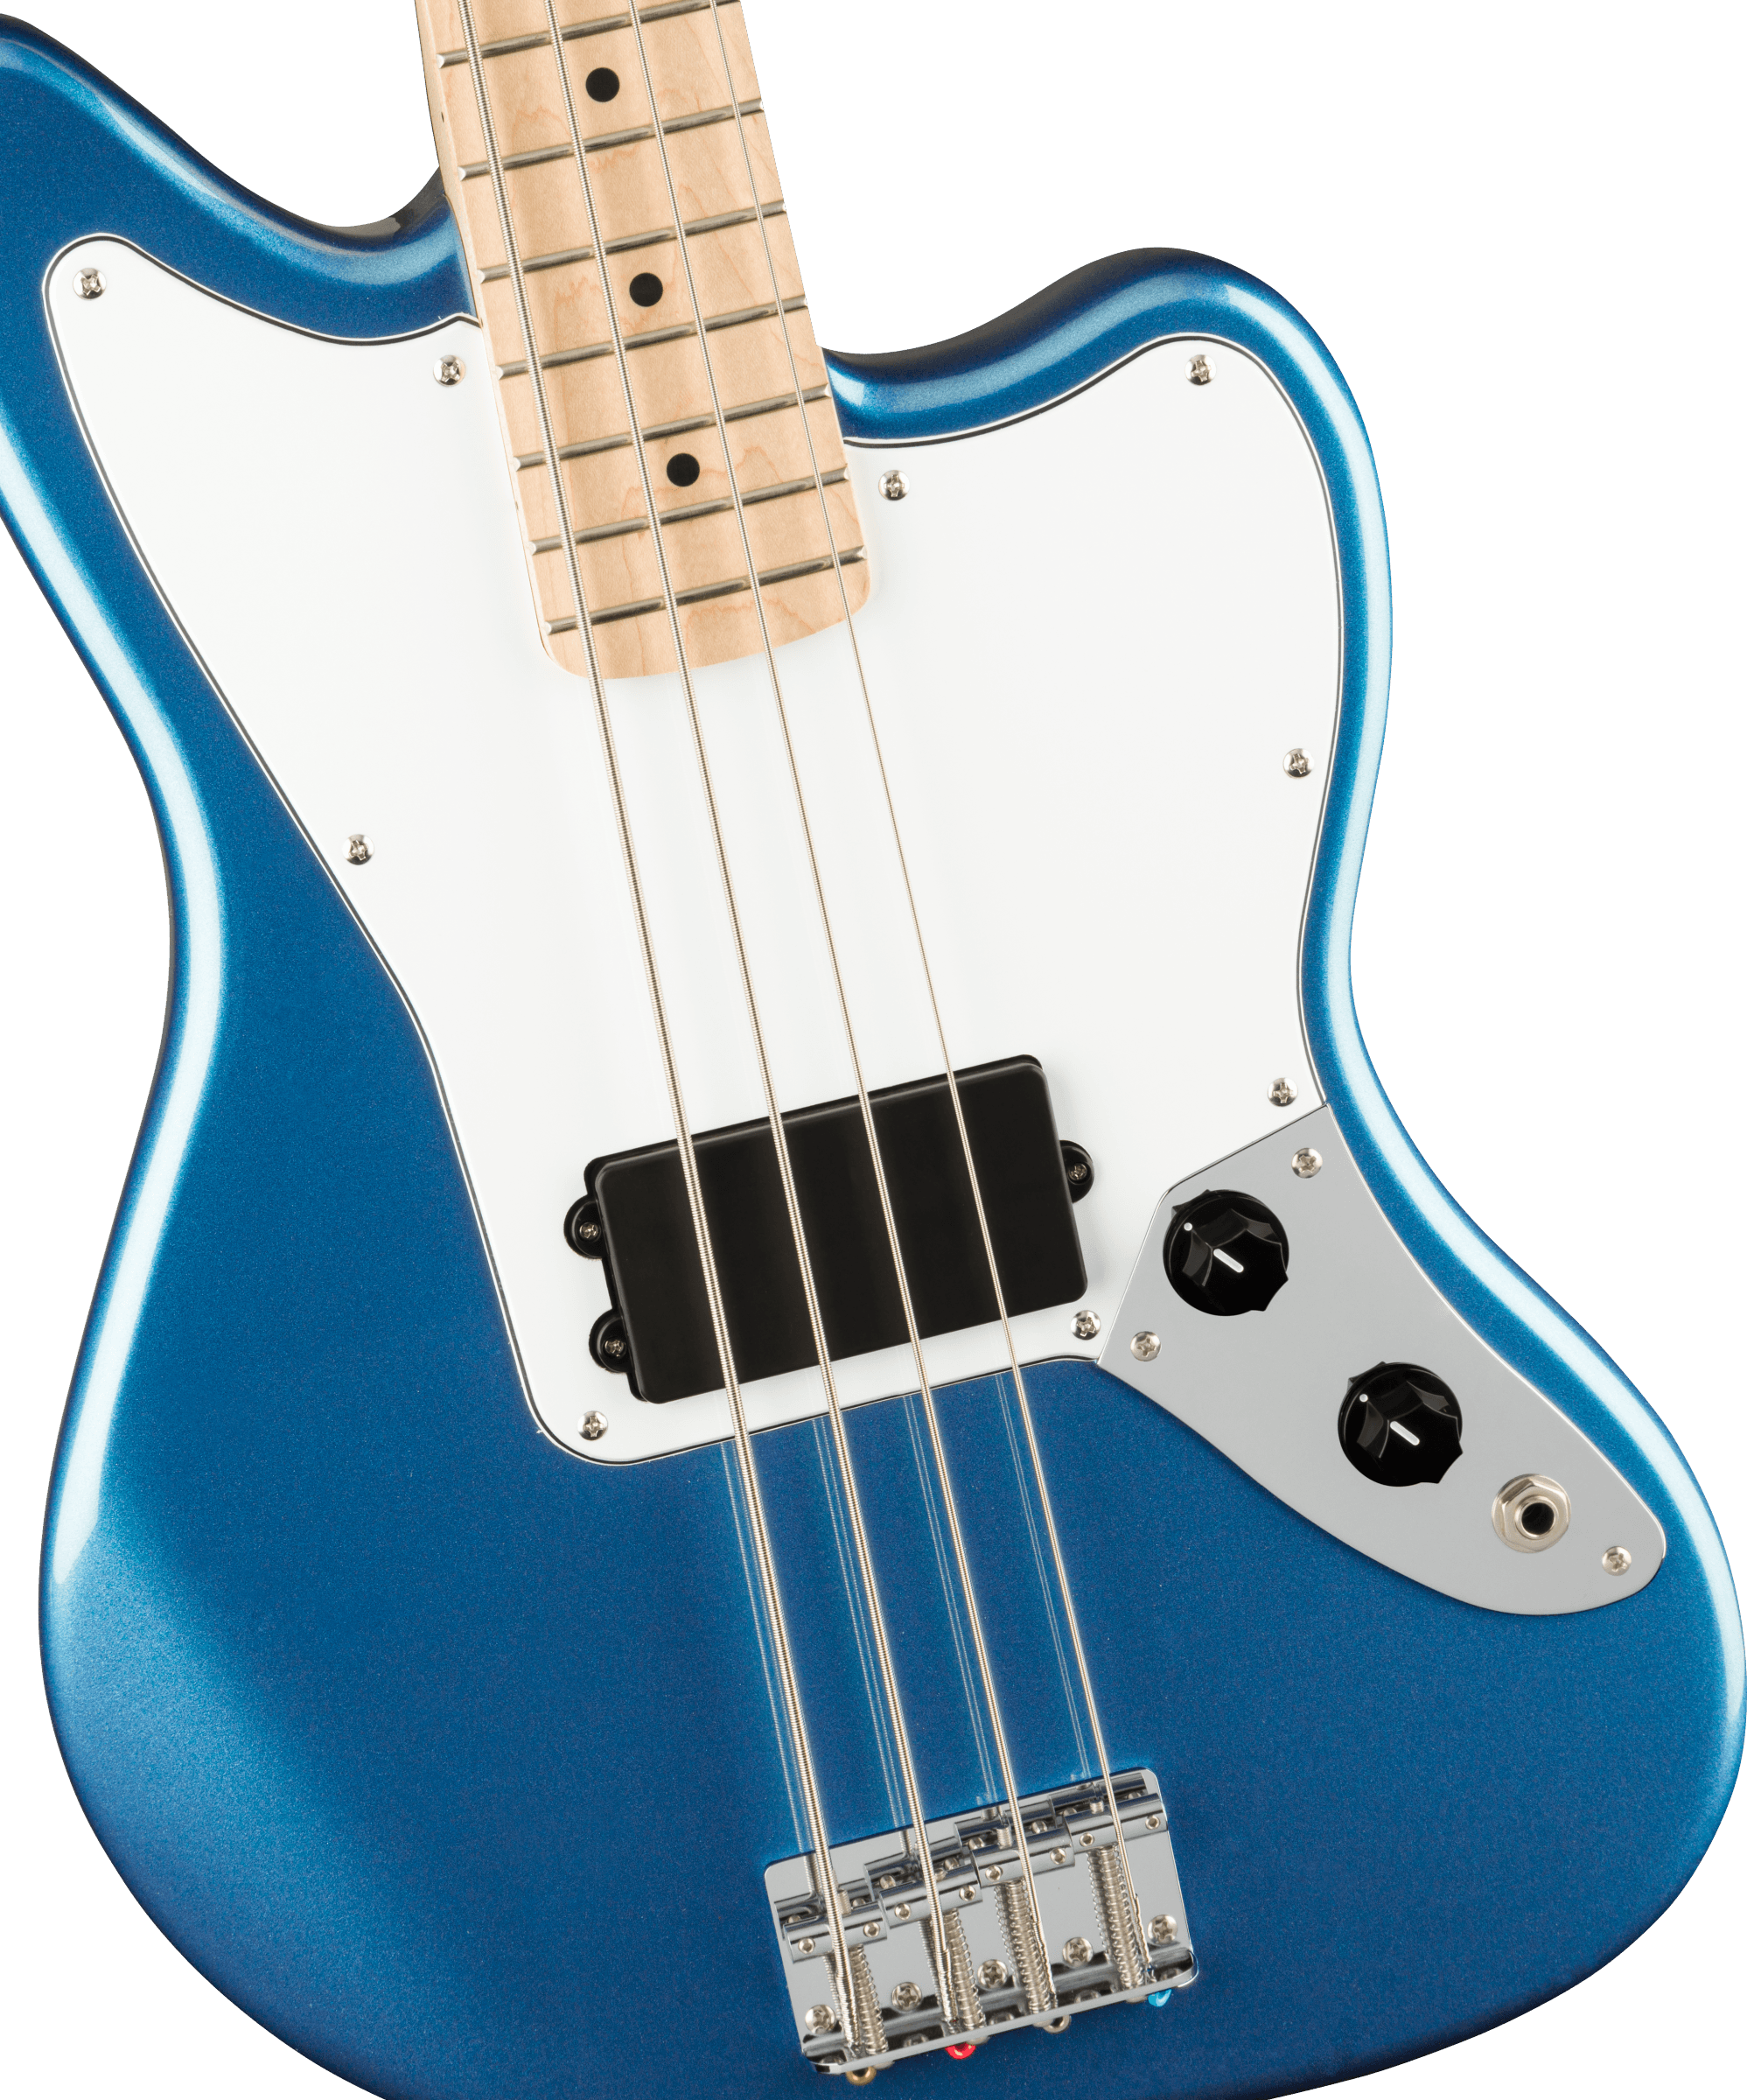 Squier Jaguar Bass Affinity 2021 Mn - Lake Placid Blue - Solid body electric bass - Variation 2